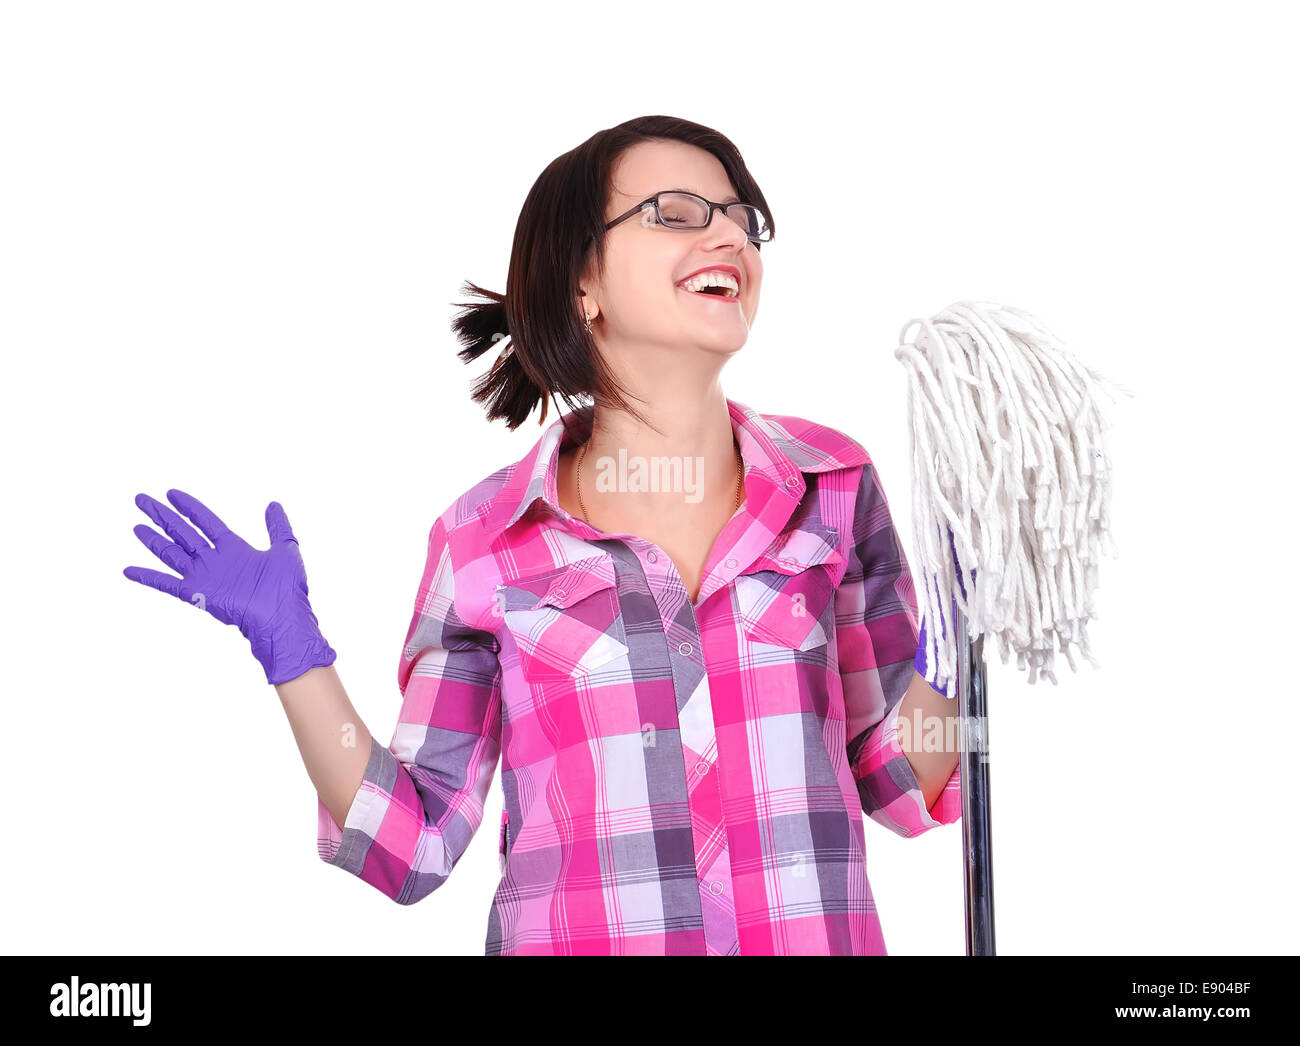 happiness cleaning woman singing with mop in hand Stock Photo